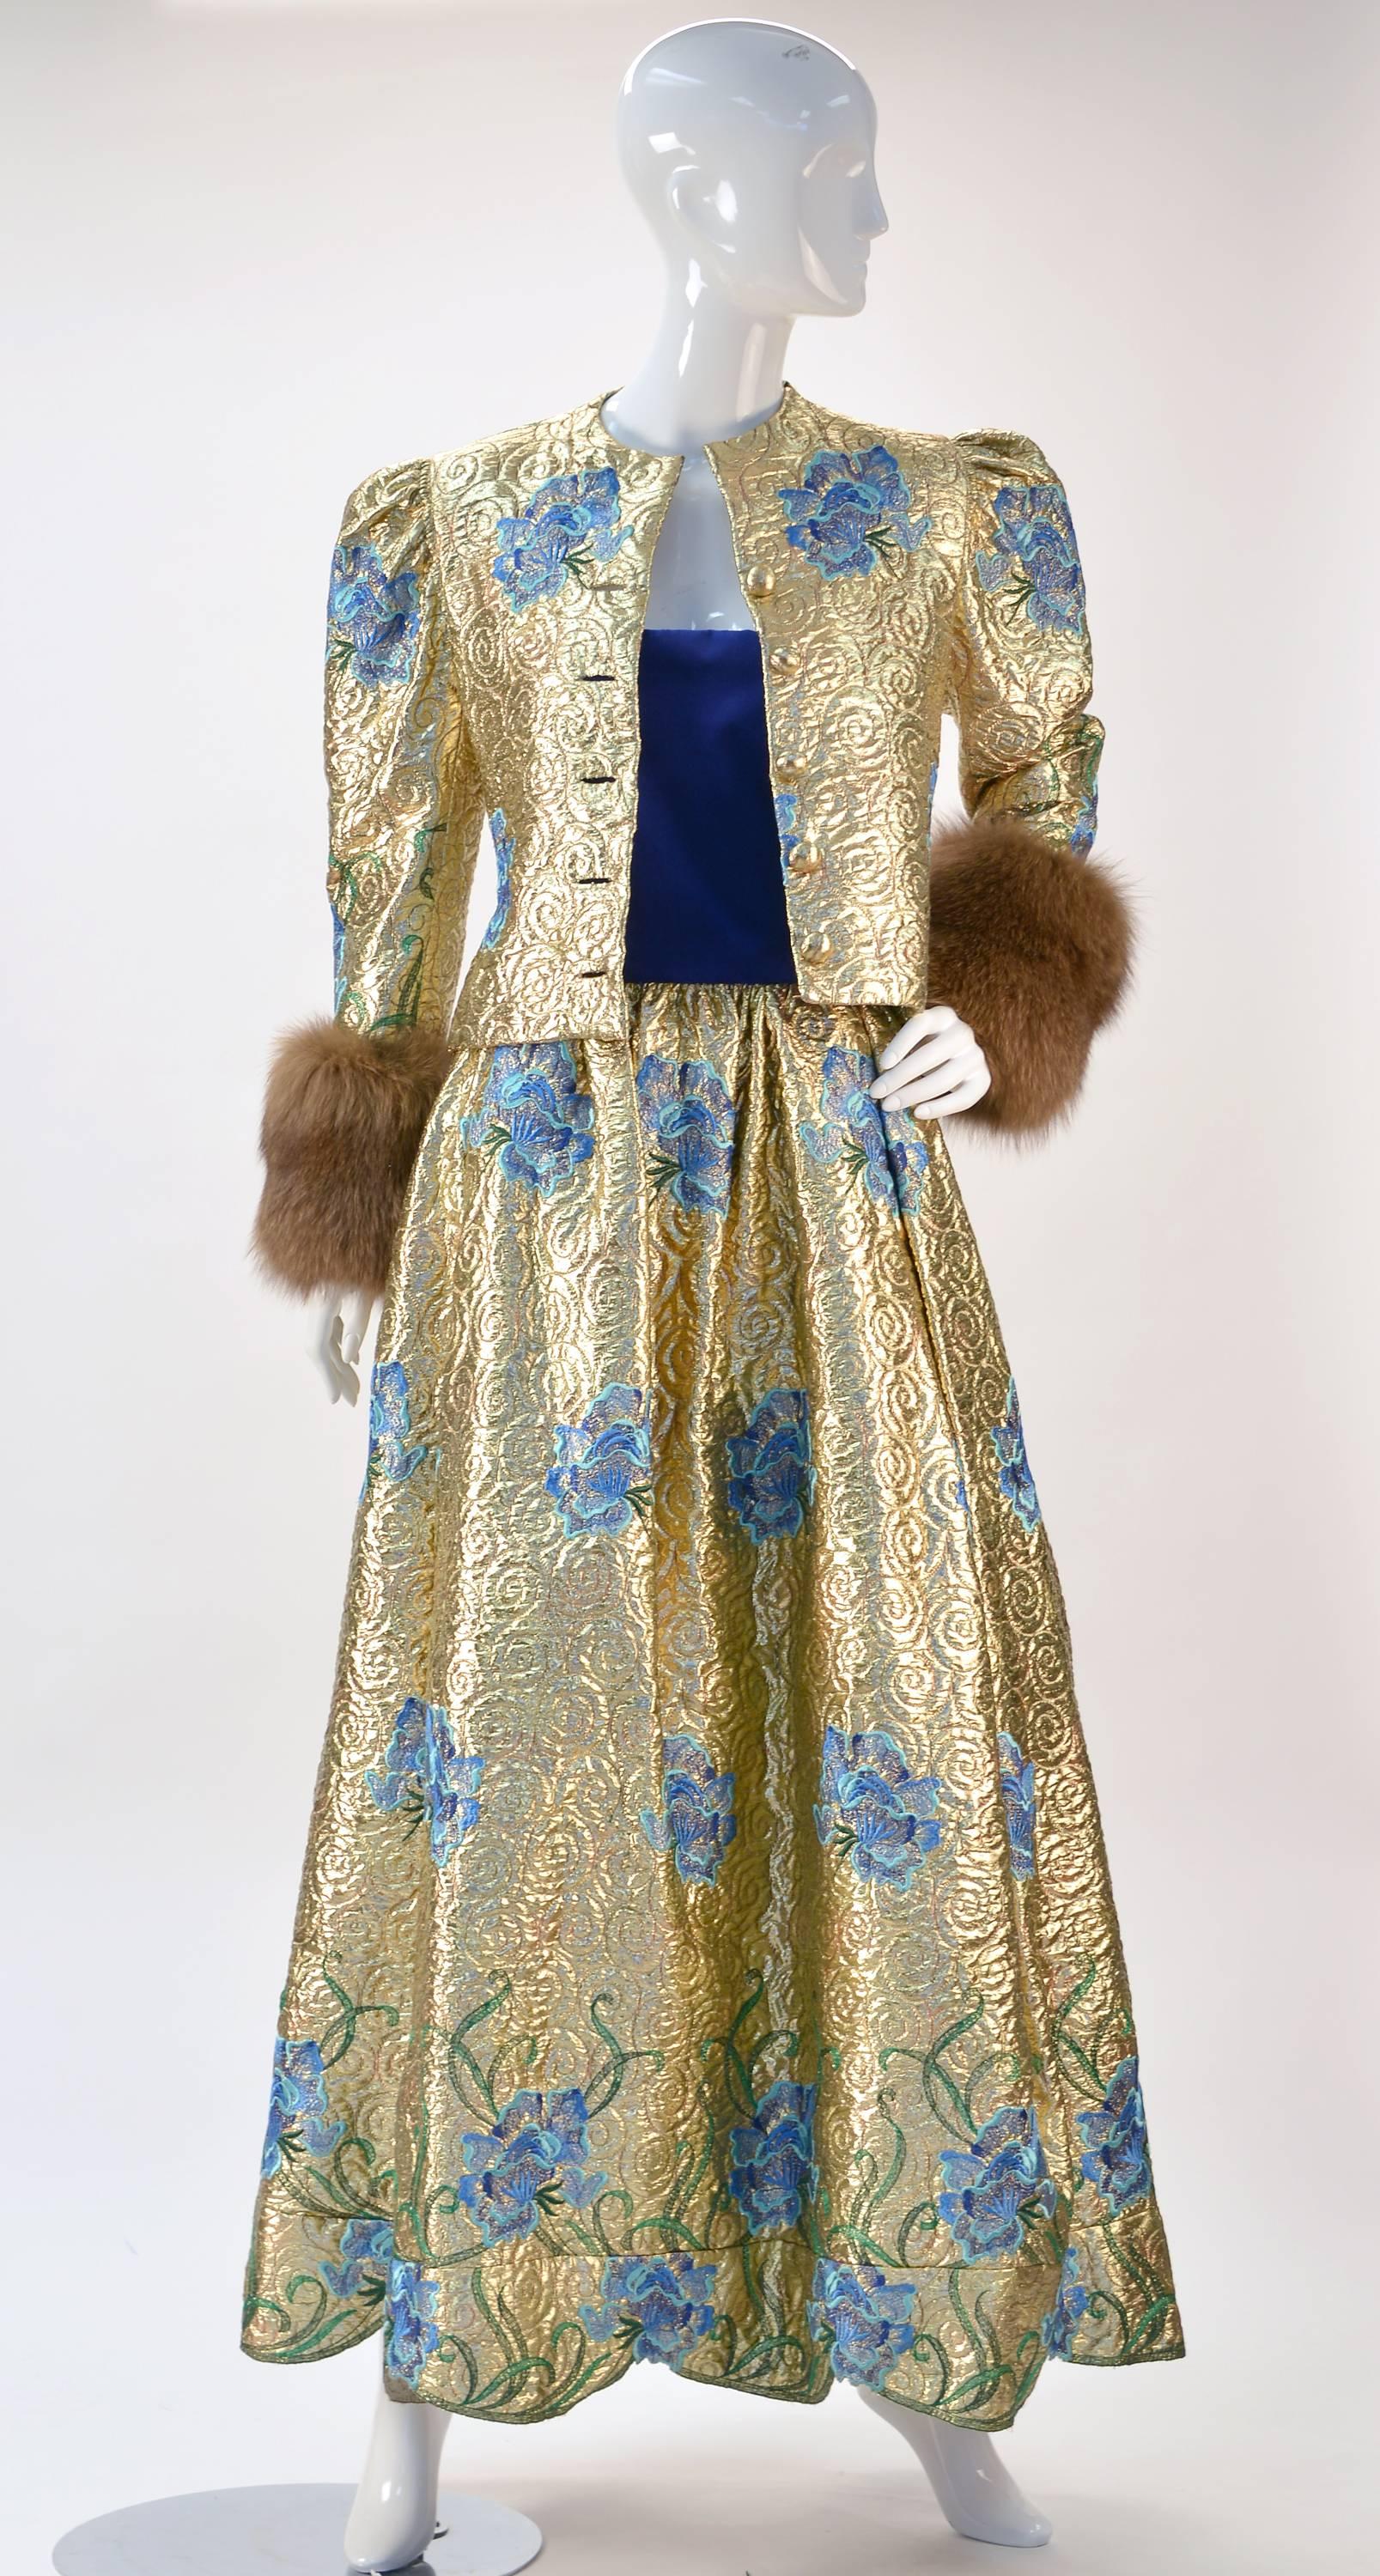 Fabulous Scaasi gold lame dress. Gold Lame is embroidered with gold thread, blue flowers and green vines. Dress bodice is strapless royal blue velvet. Gathered with one pleat in back. Zips at back. The matching jacket buttons at front with gold